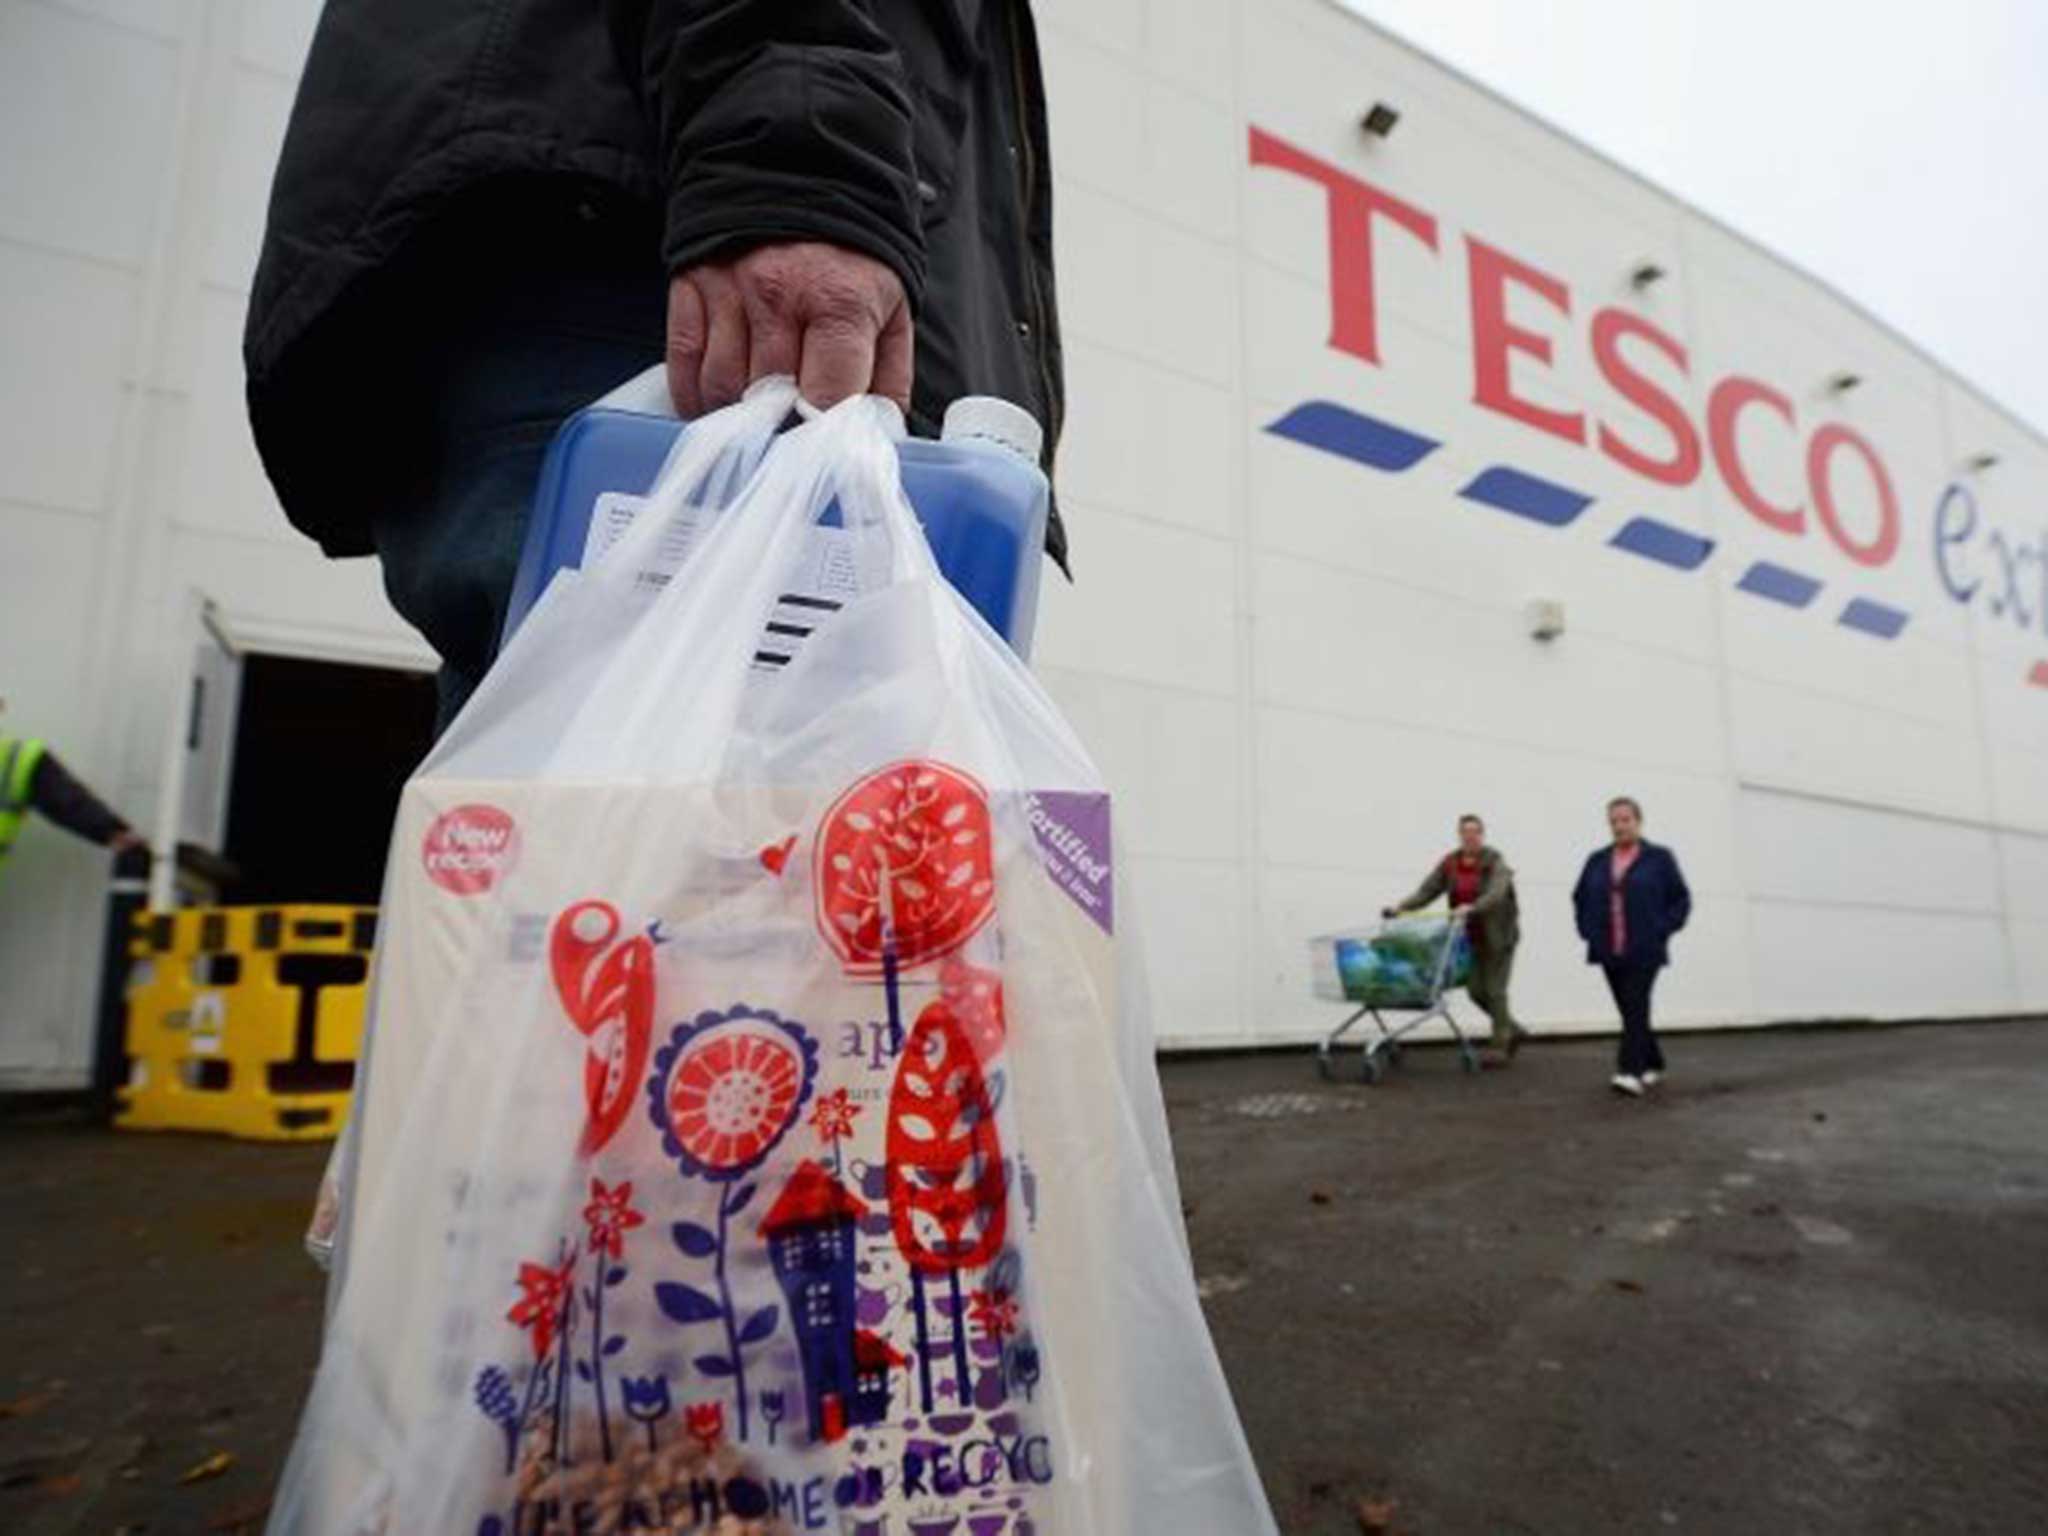 Tesco was plunged into crisis last year after issuing four profit warnings and revealing an accounting scandal